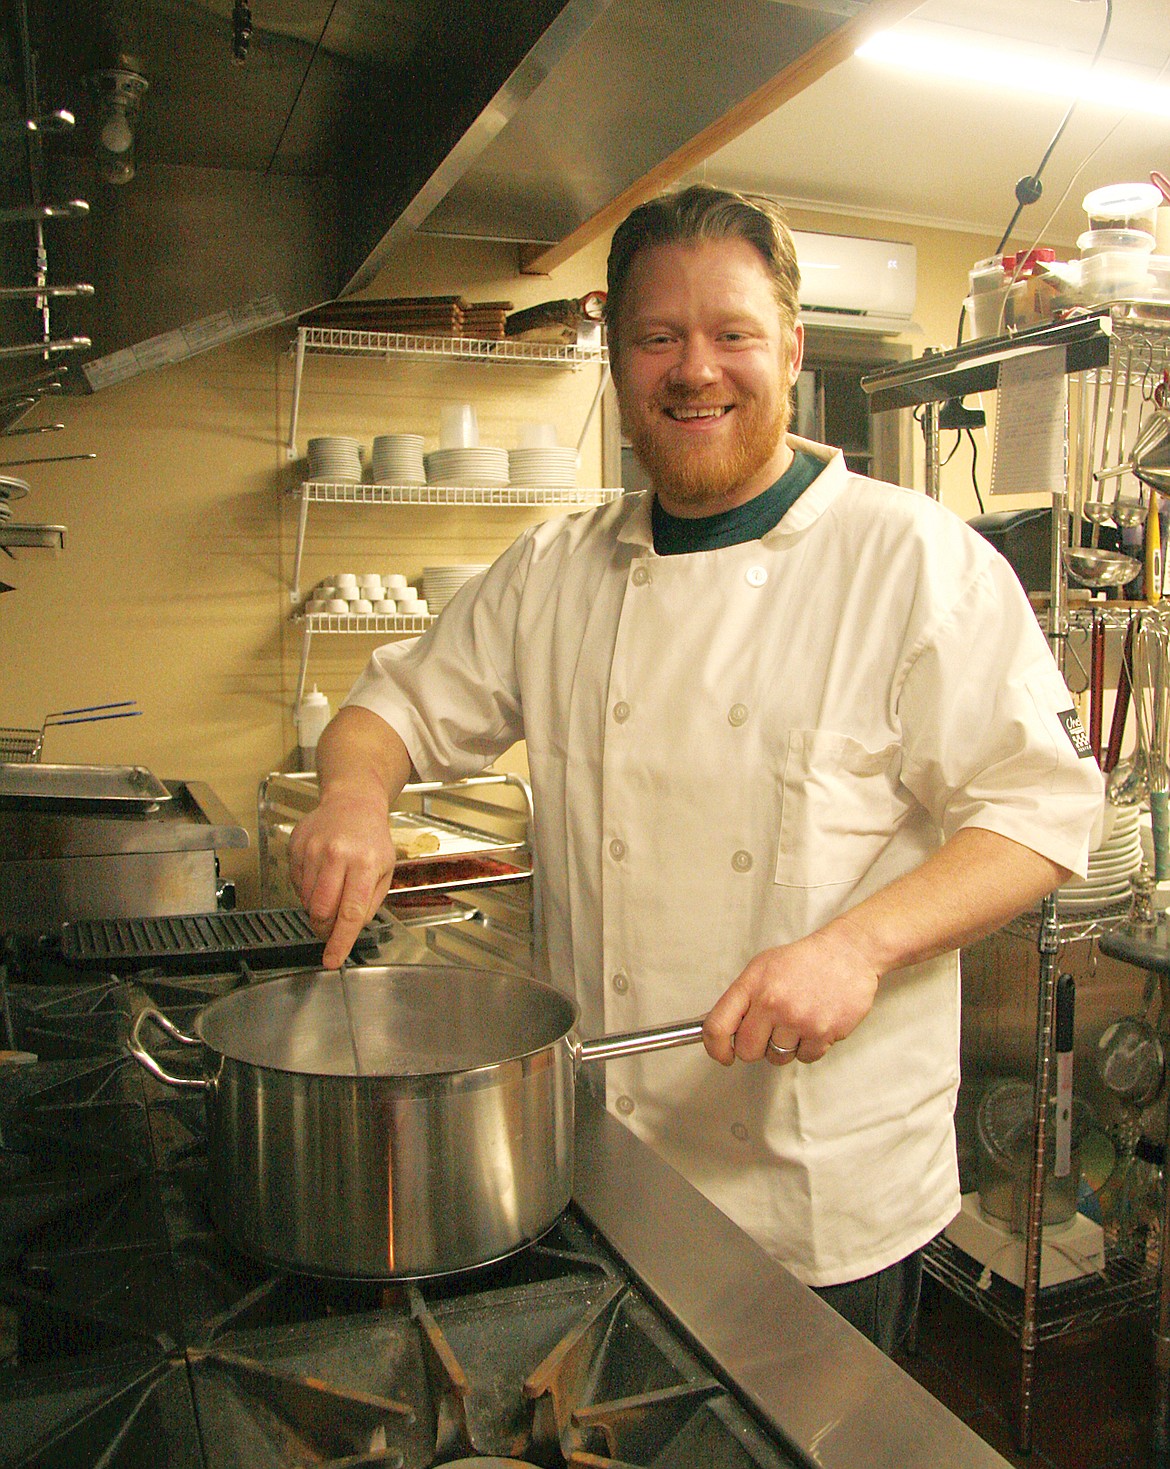 Chef Seth Black has had over 18 years experience in the culinary world and trained in Mediterranean cuisine under one of the best chefs in Denver. (Bethany Rolfson/TWN)